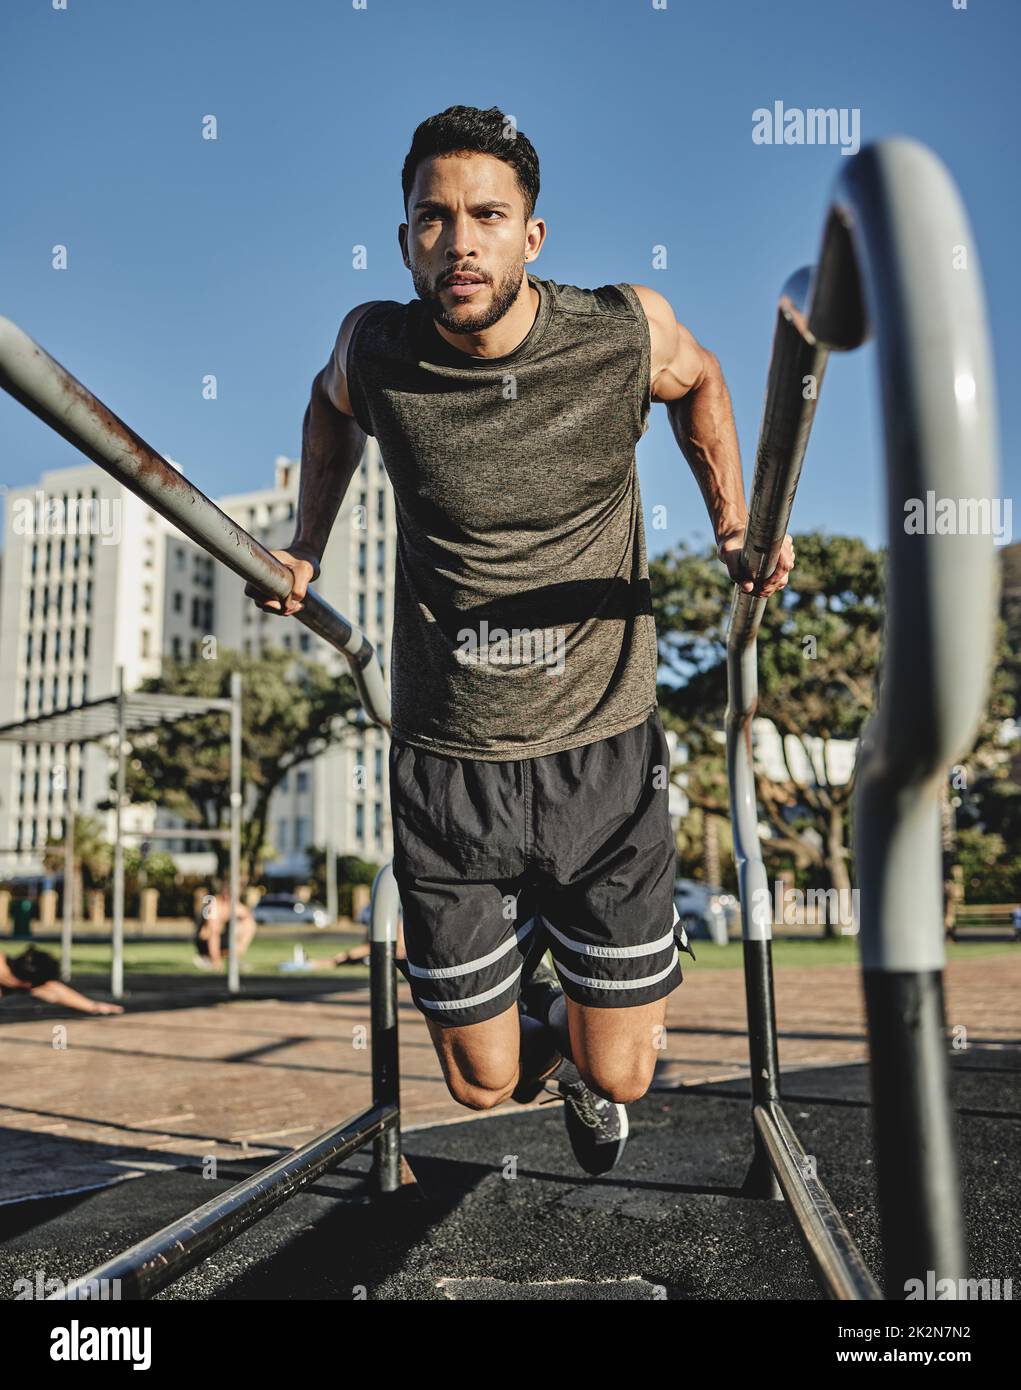 A little effort goes a long way. Shot of a muscular young man exercising at a calisthenics park. Stock Photo